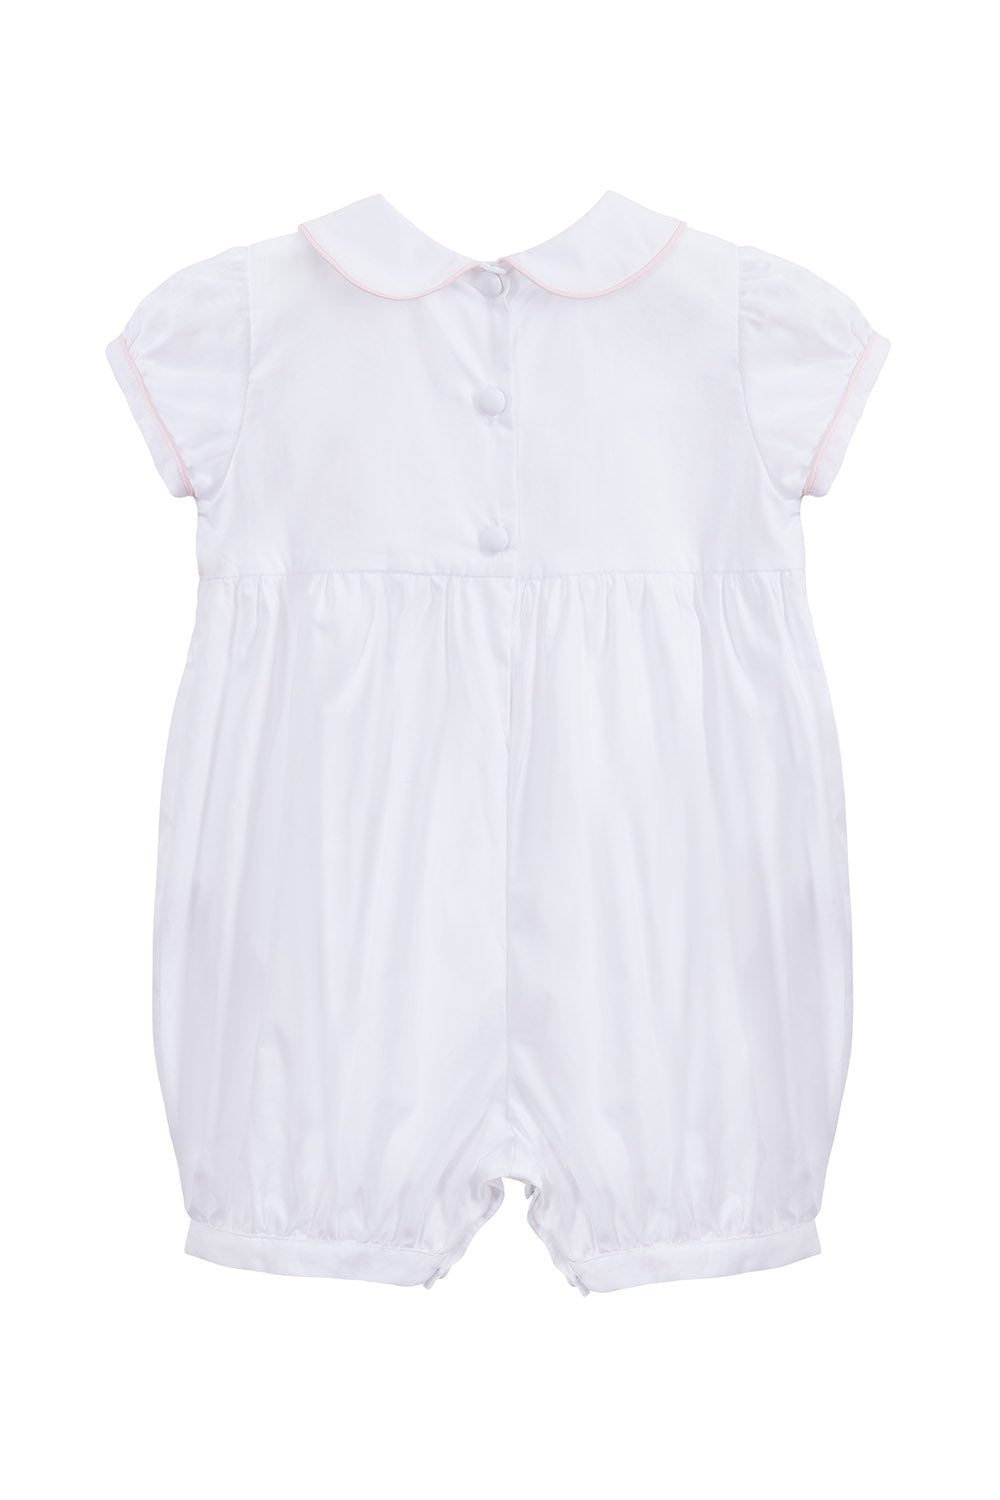 Willow Smocked Romper